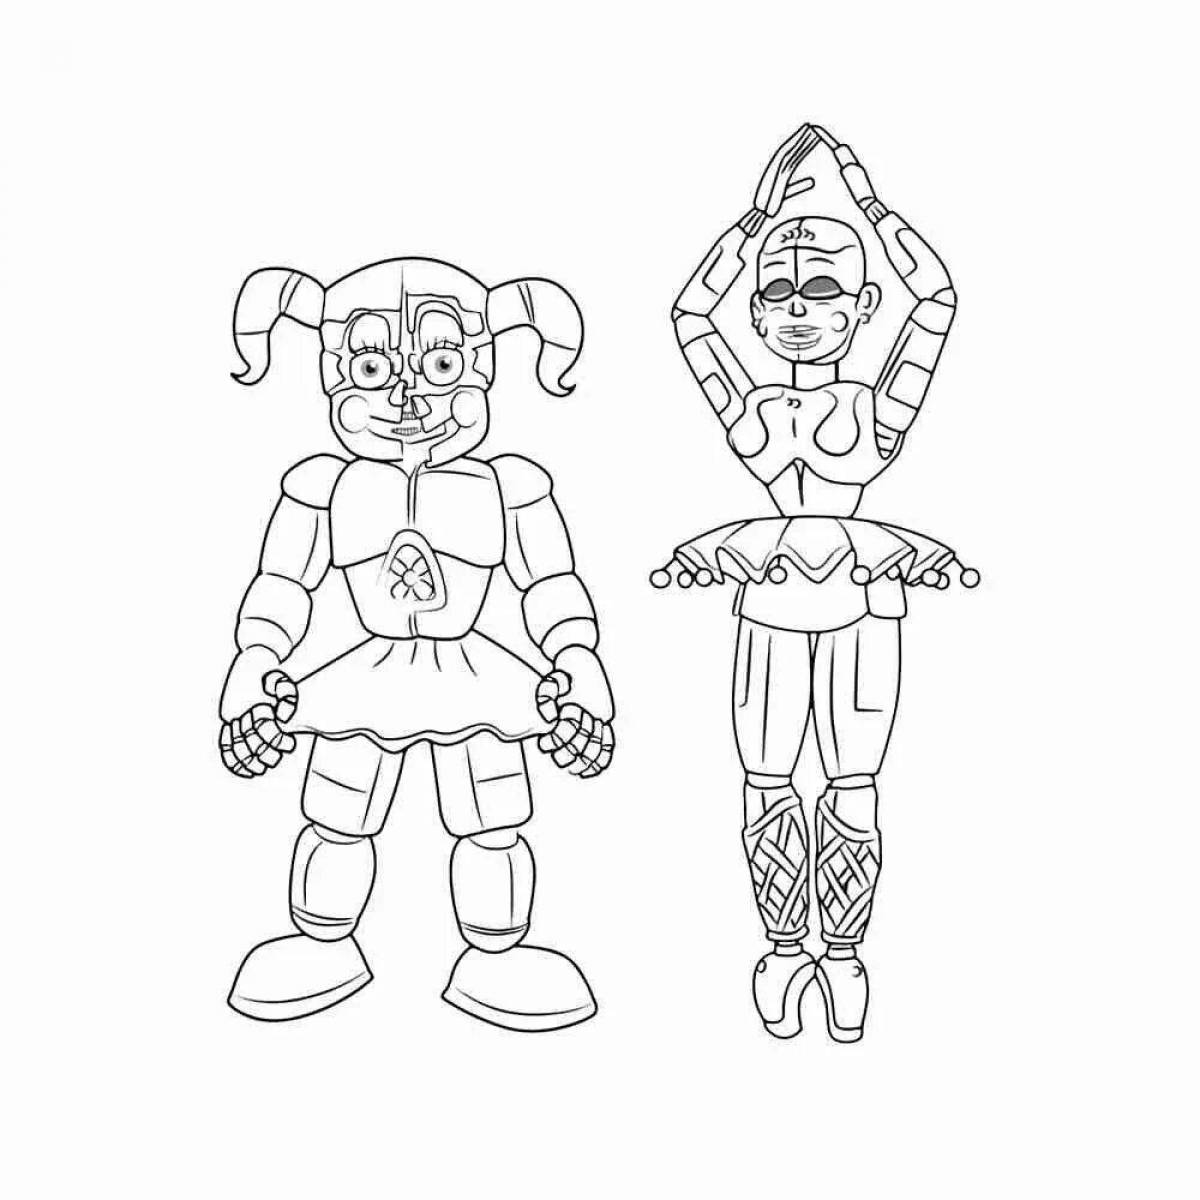 Coloring radiant circus baby